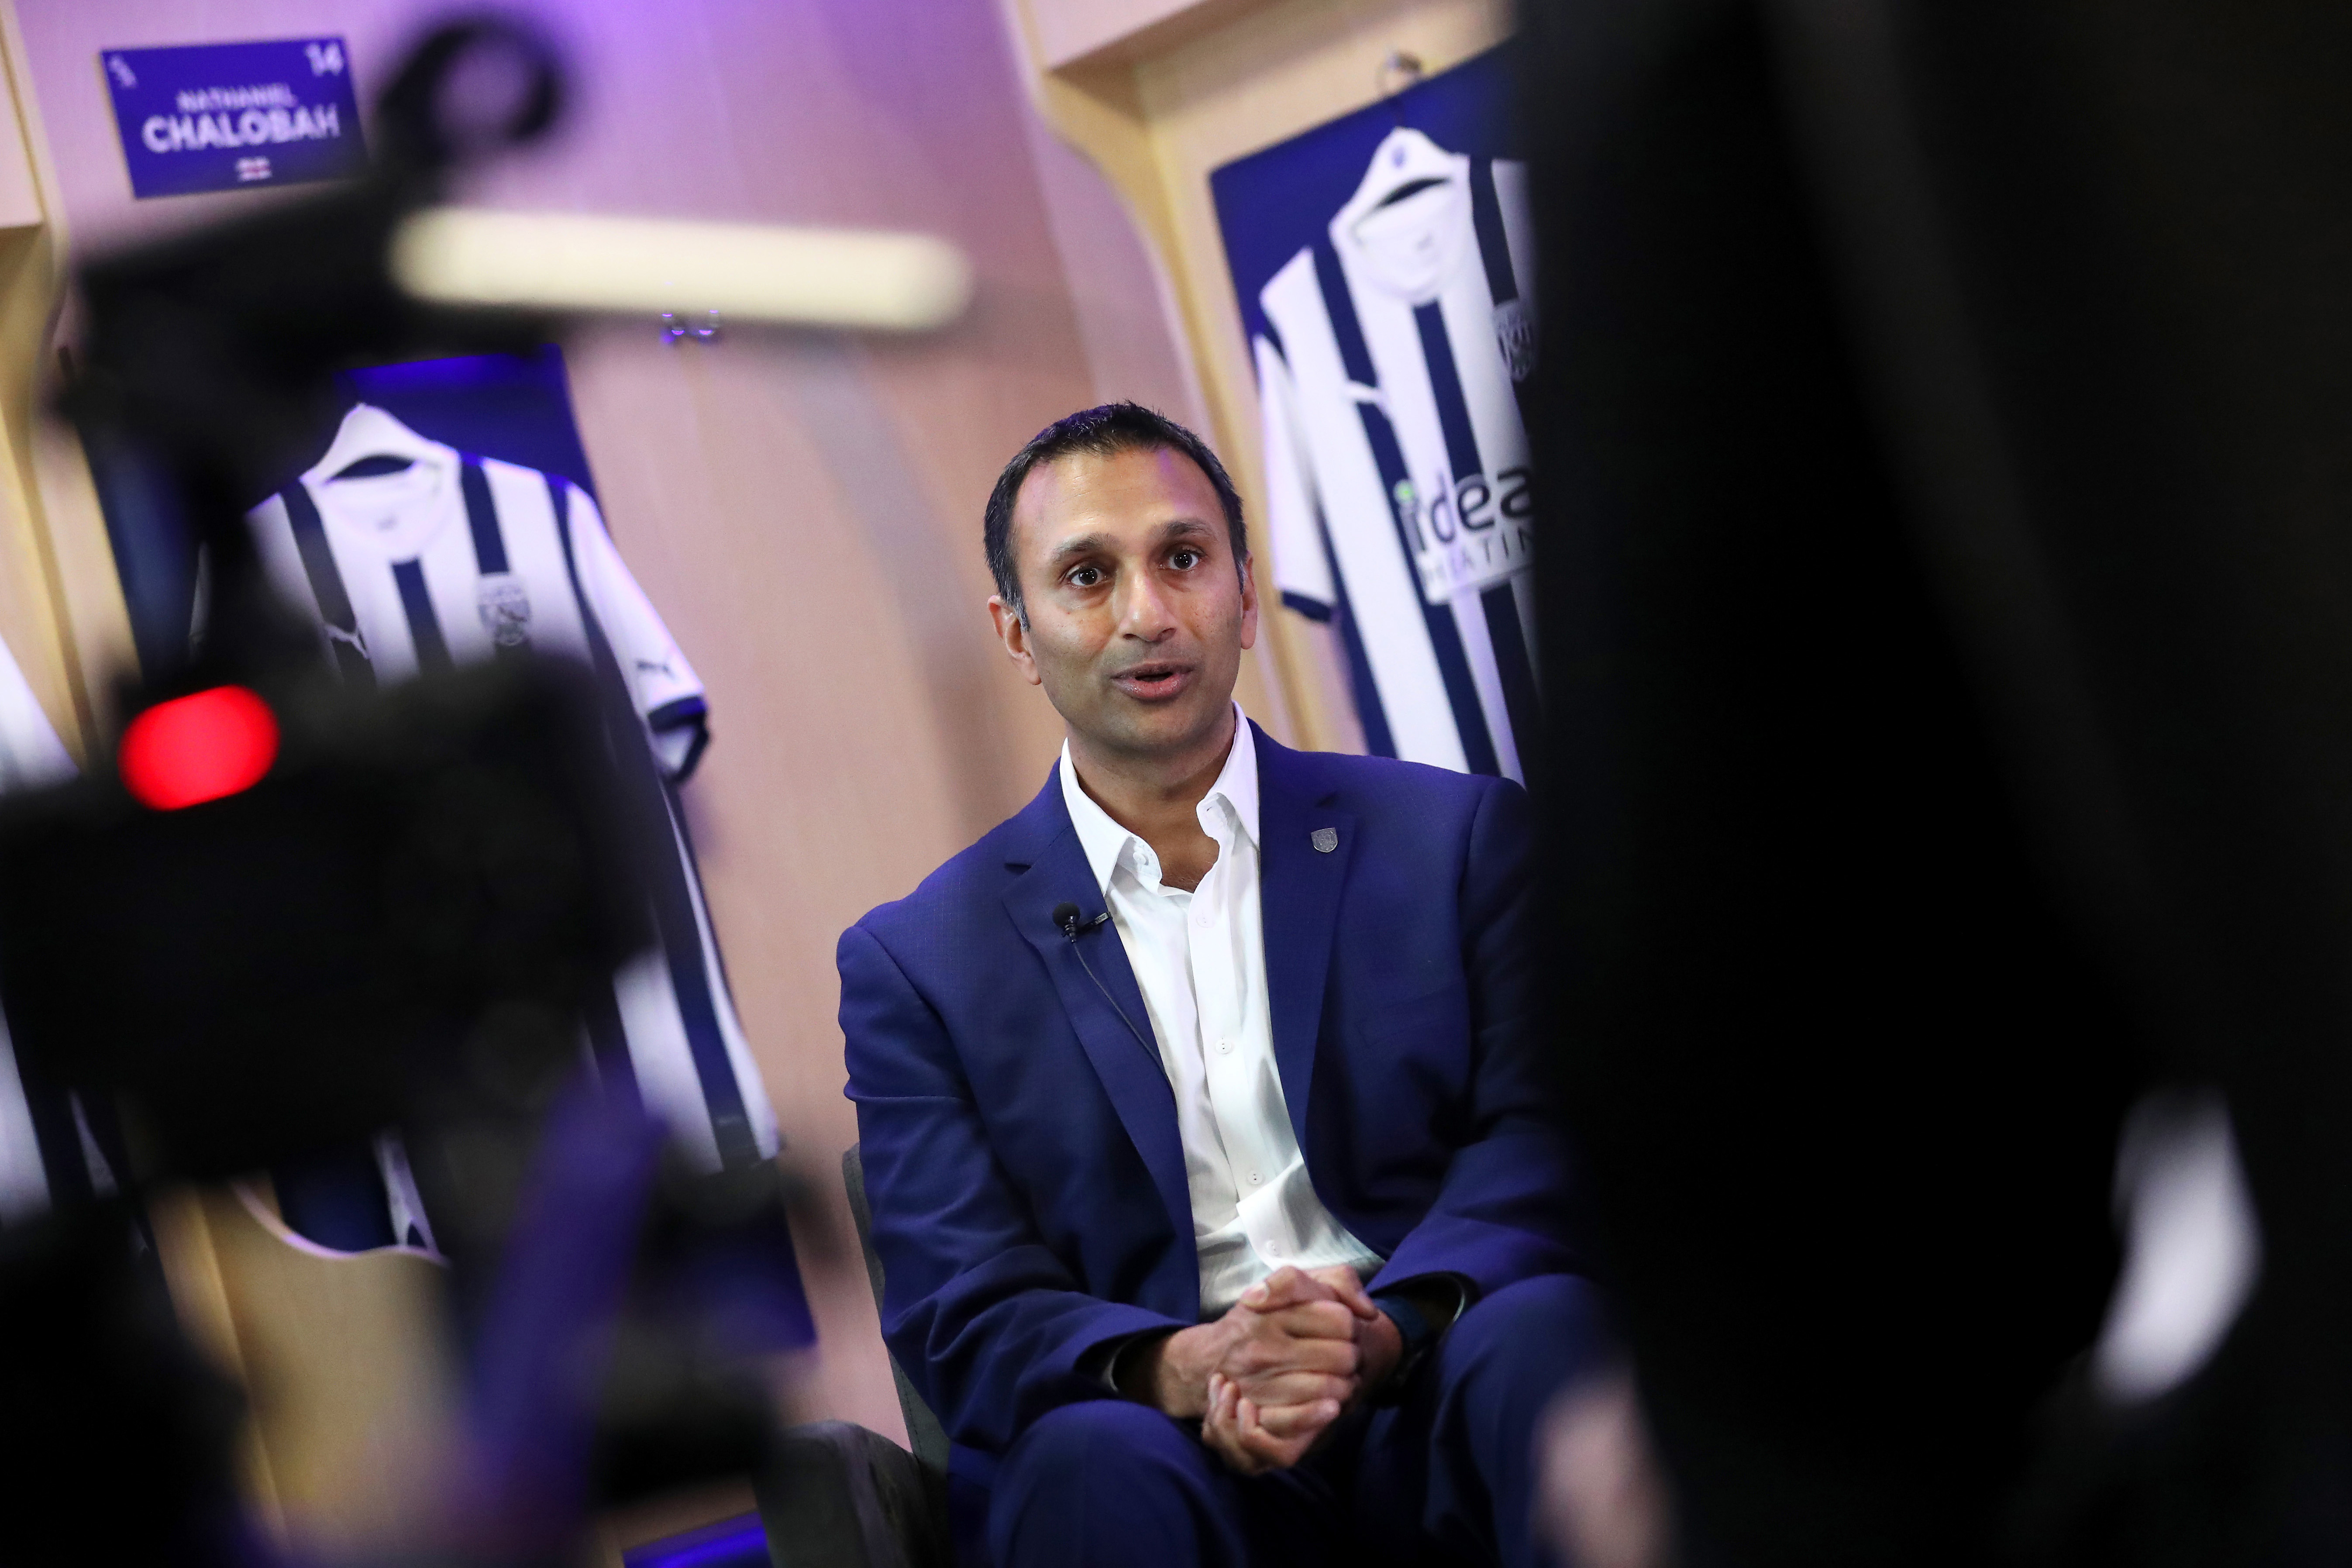 Shilen Patel is interviewed by WBA TV in the home dressing room at The Hawthorns with Albion shirts behind him and a camera to his side